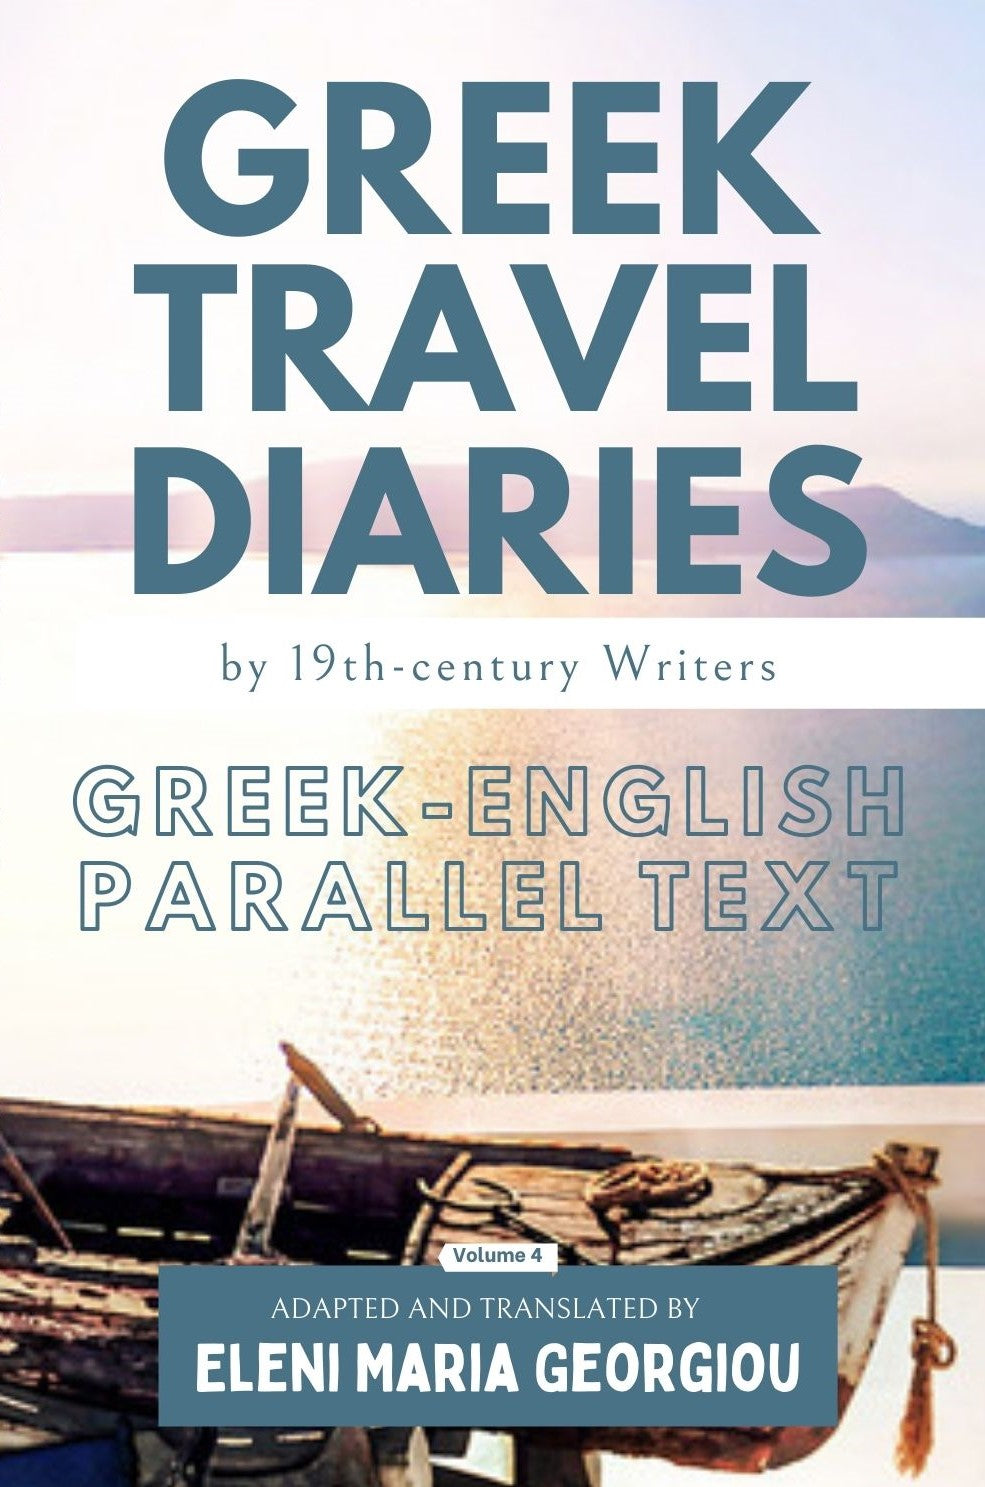 Greek Travel Diaries by 19th-century Writers: Greek-English Parallel Text - Volume 4